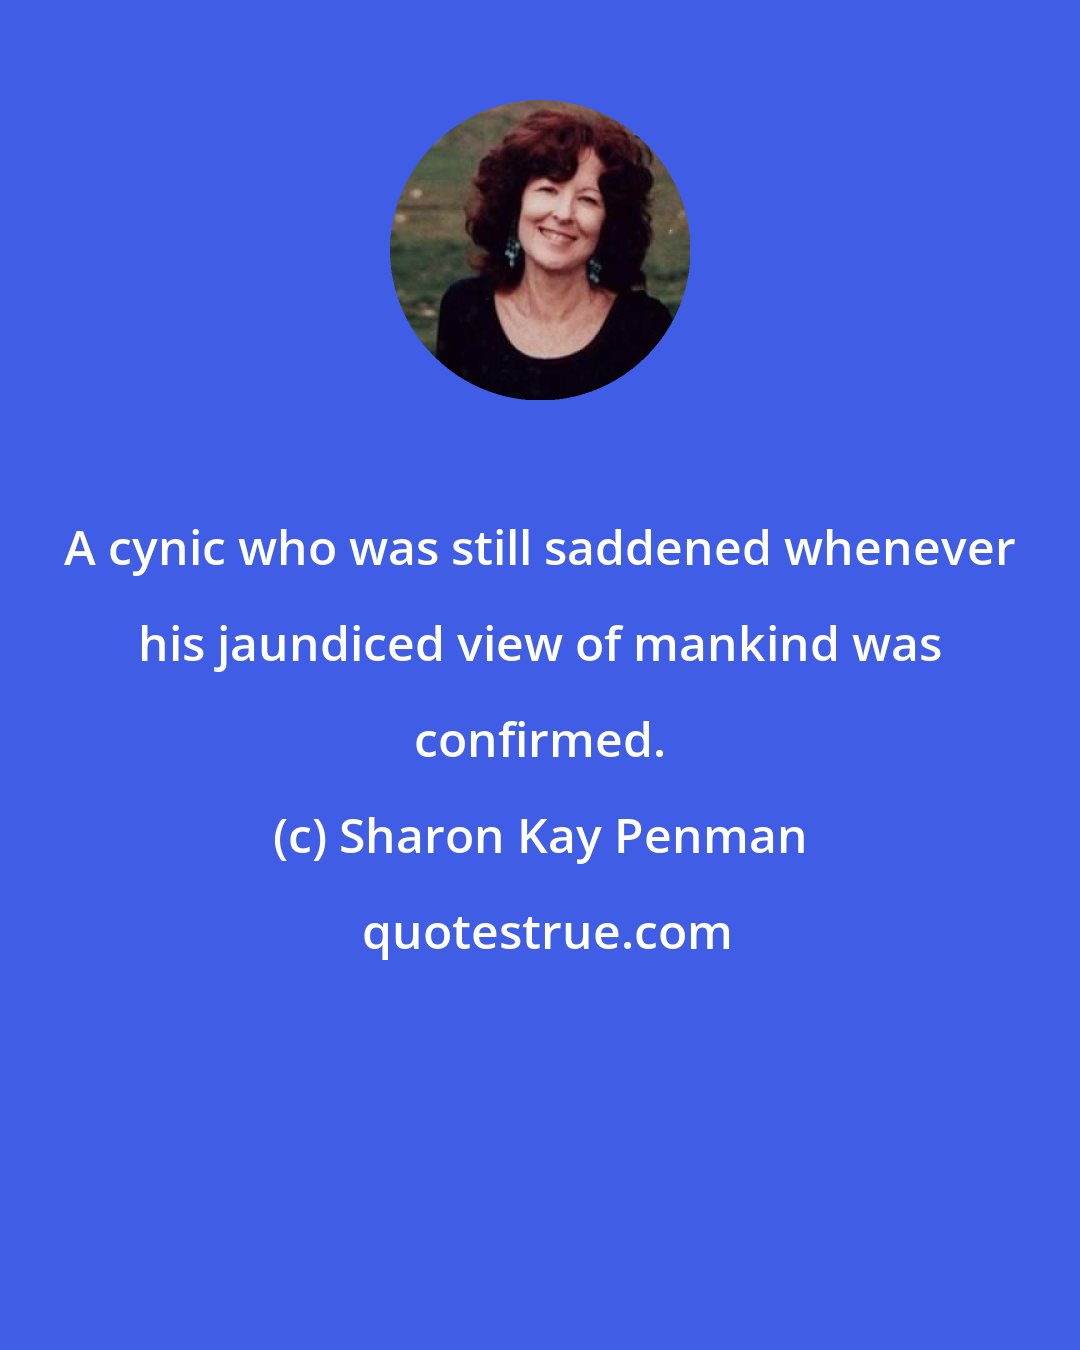 Sharon Kay Penman: A cynic who was still saddened whenever his jaundiced view of mankind was confirmed.